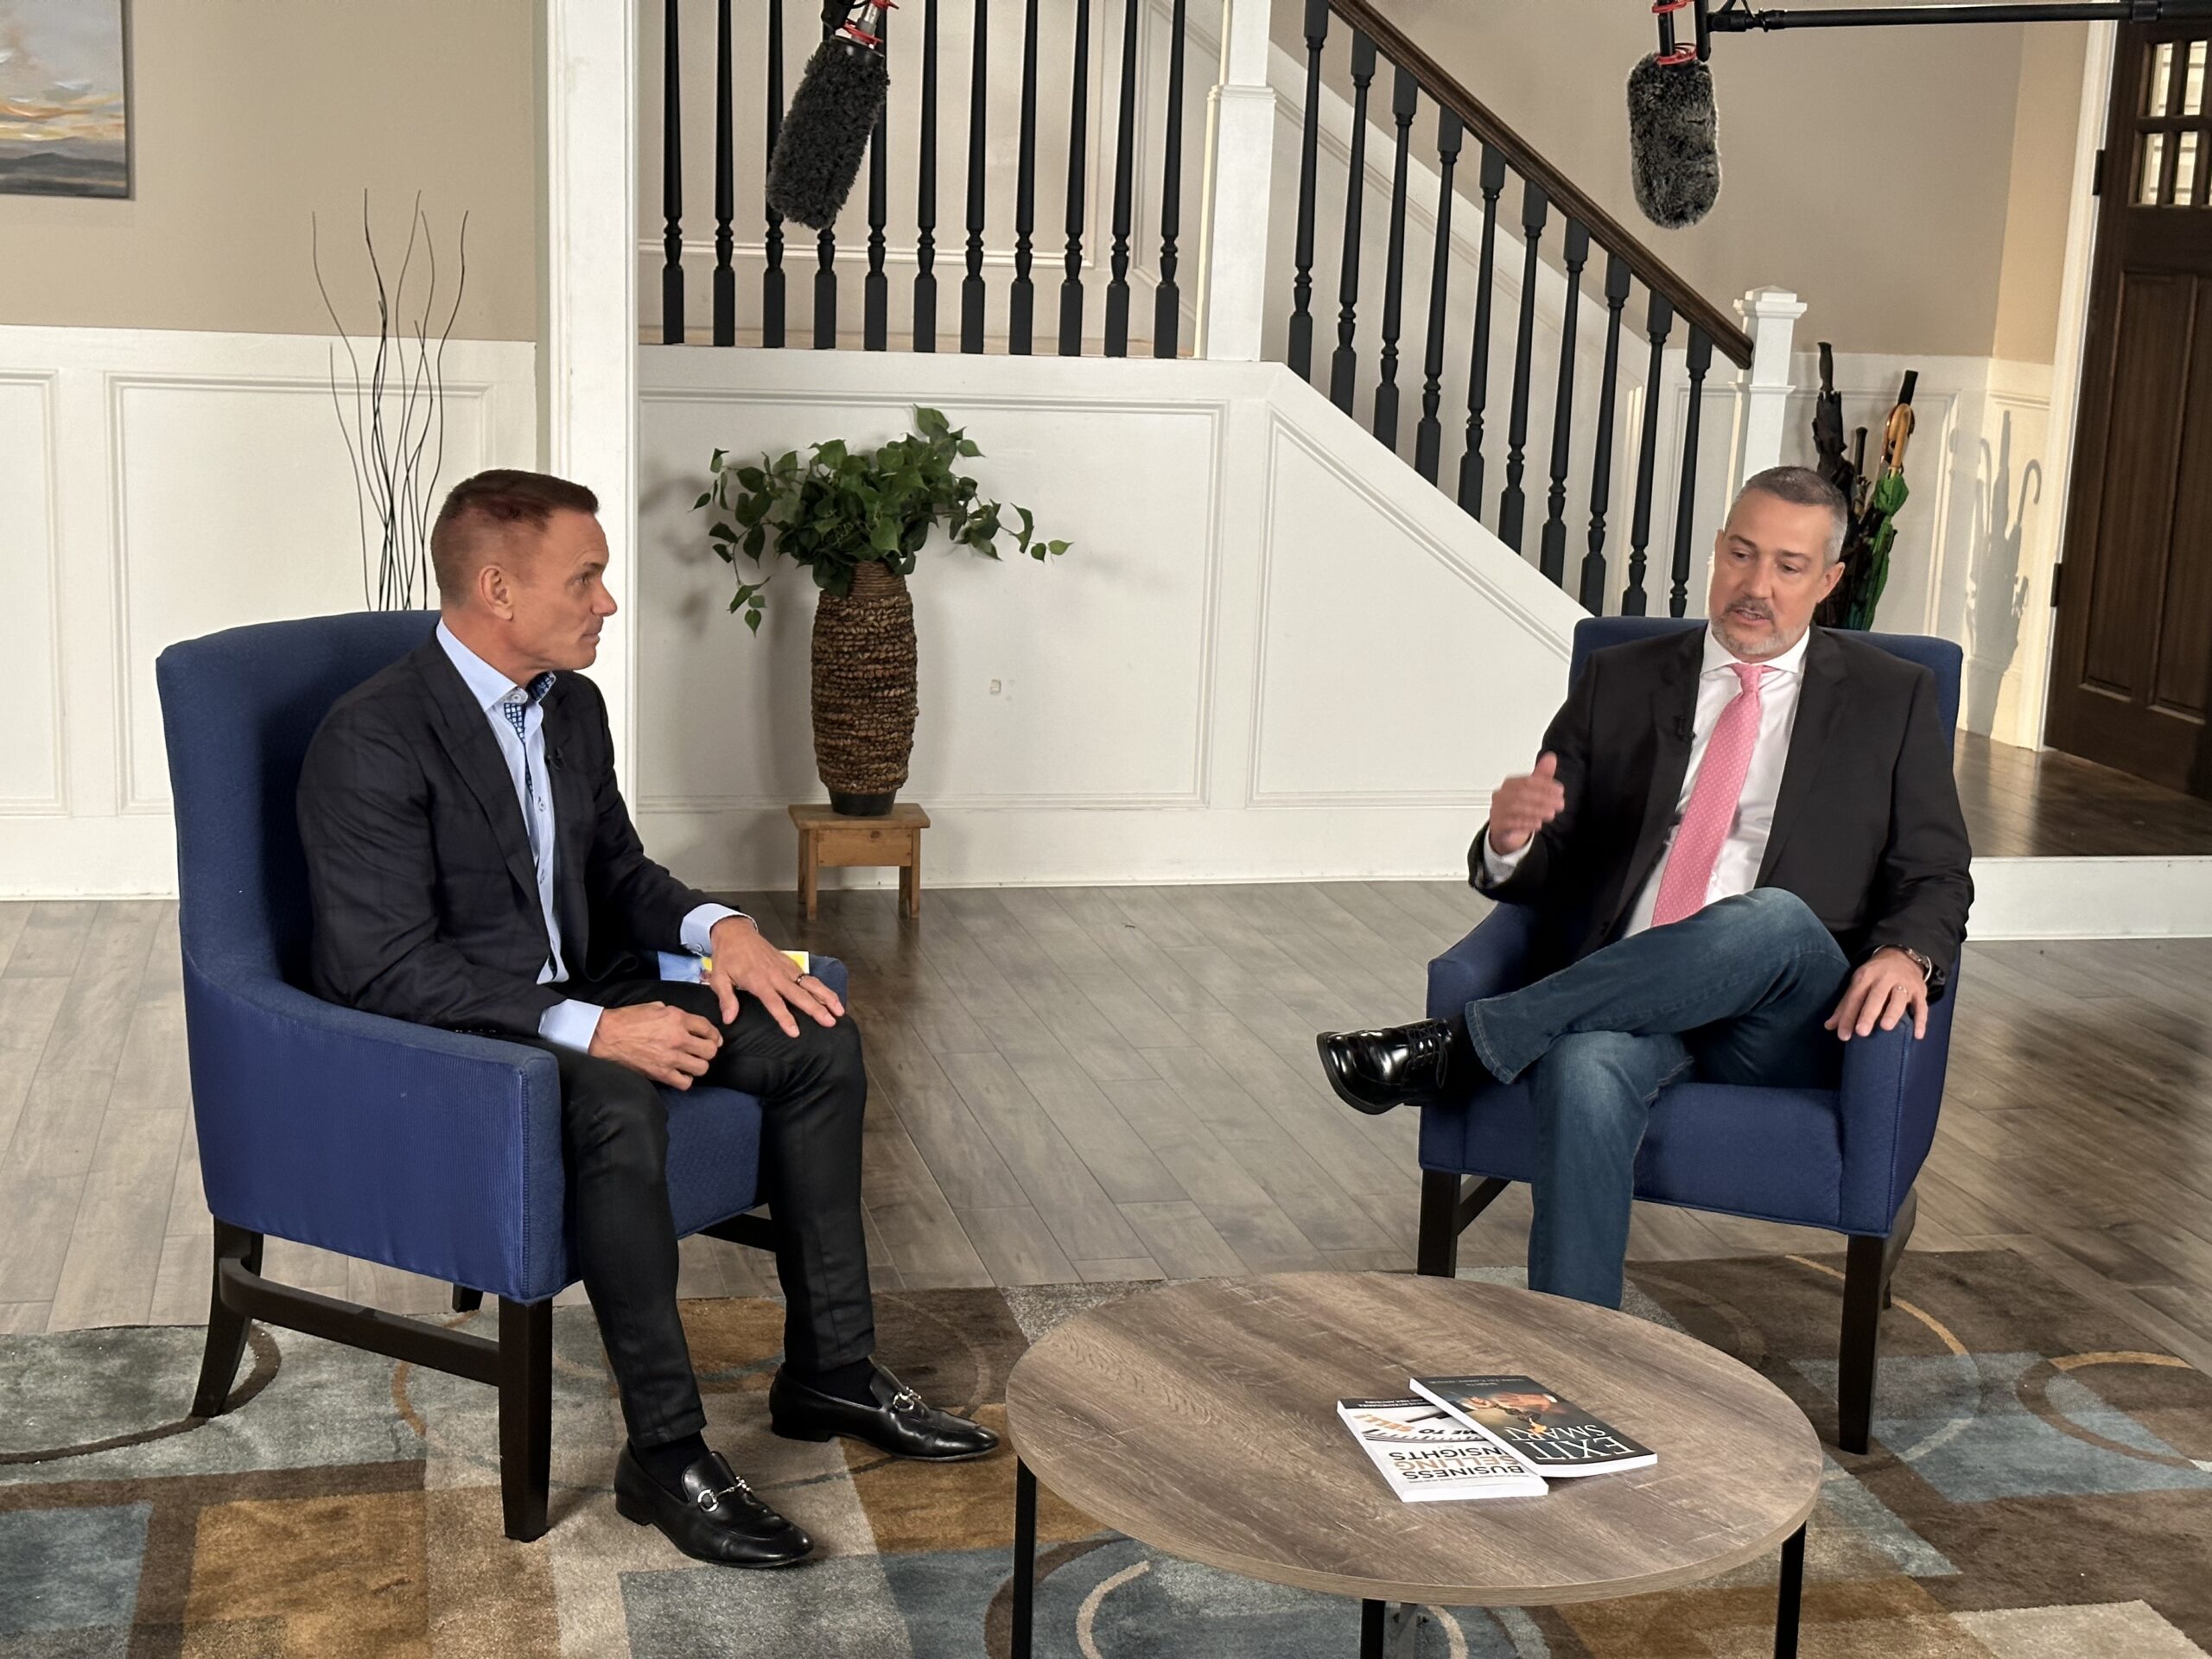 Get Down to Business with Kevin Harrington